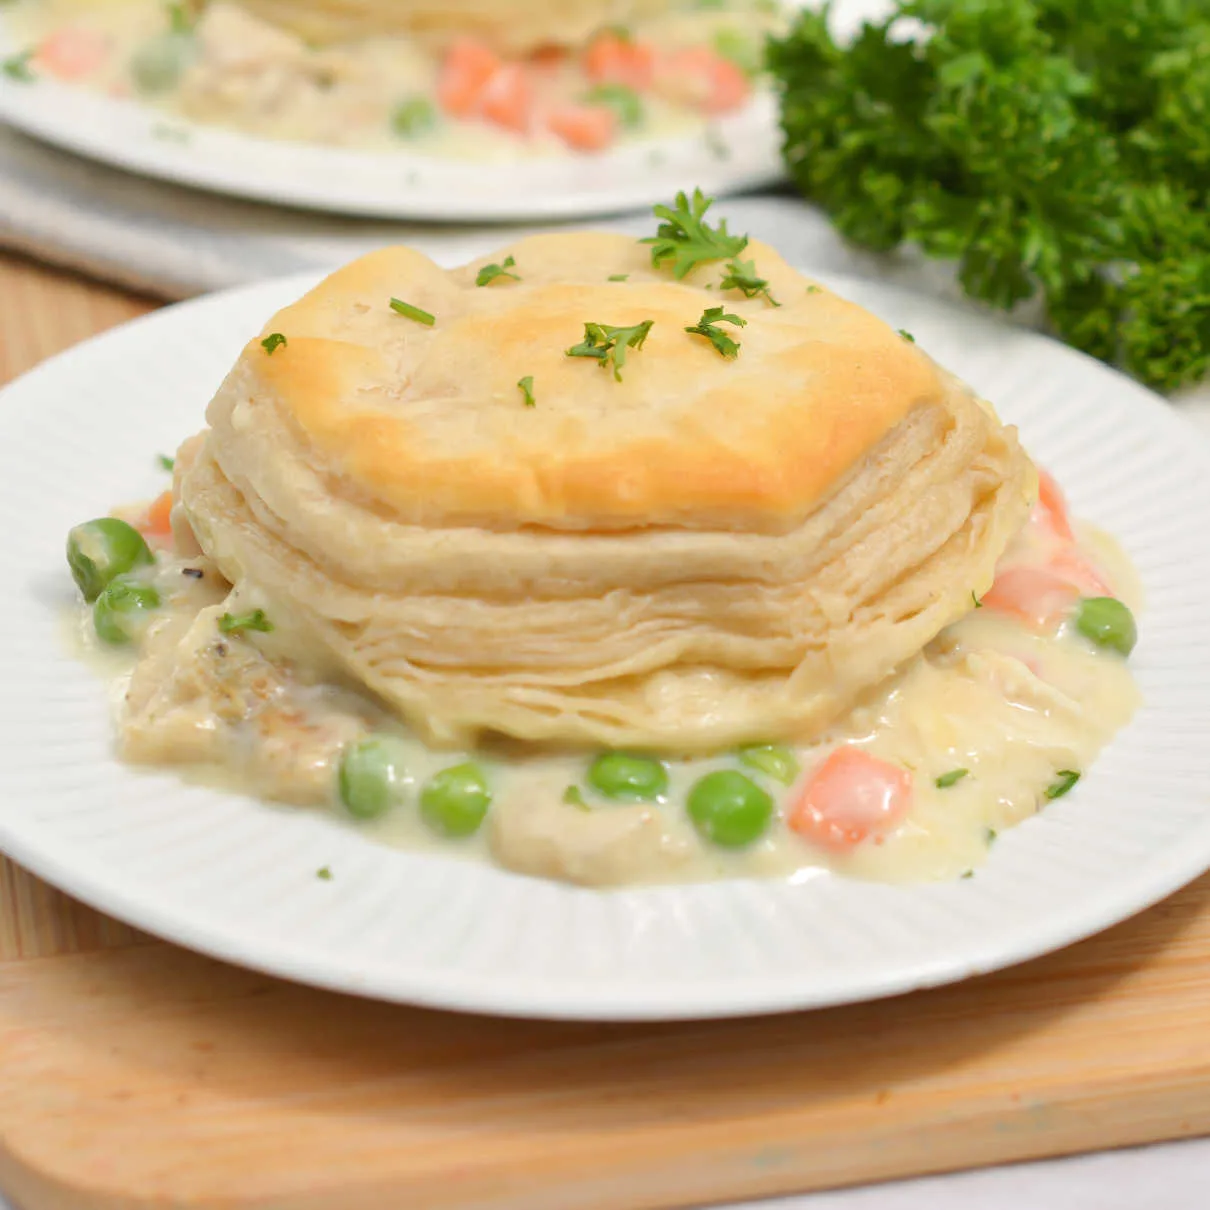 Dinner plate with chicken and veggies in creamy gravy topped with flaky golden biscuit.